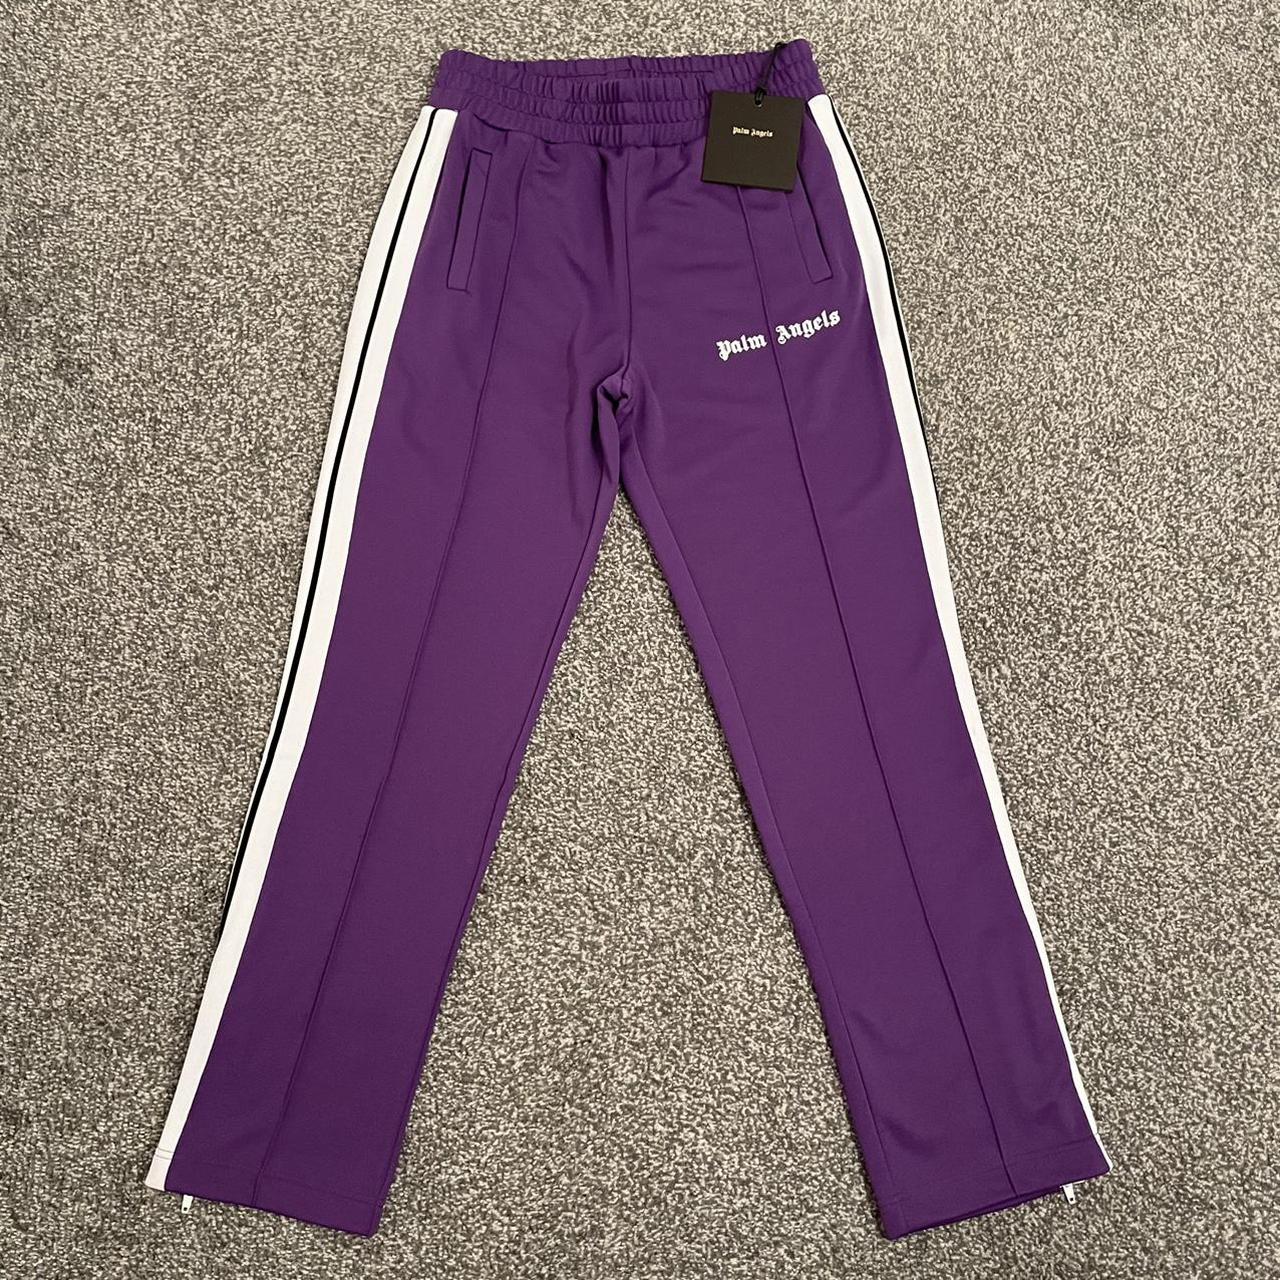 Product Image 1 - Palm Angels track pants in